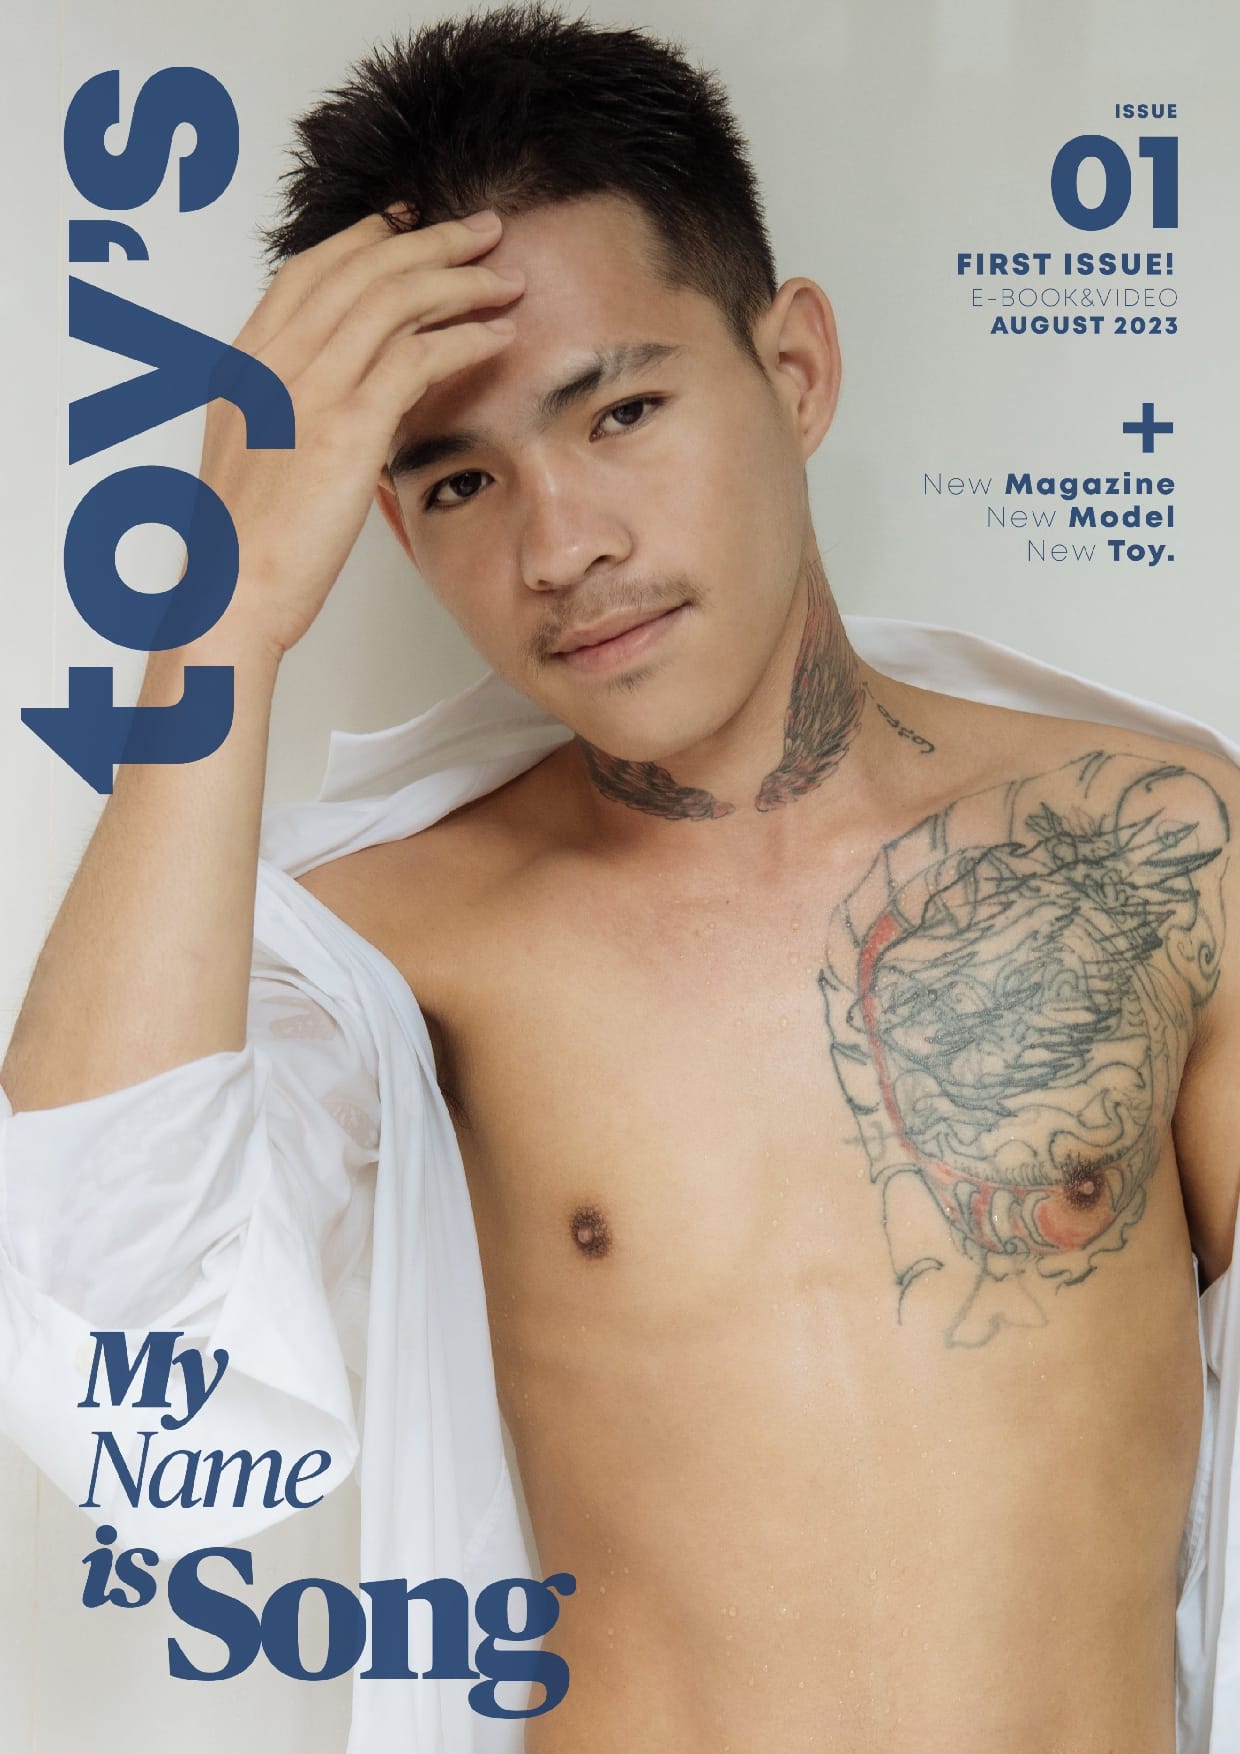 TOY’S Issue 01 – My name is Song ‖ R+【PHOTO+VIDEO】